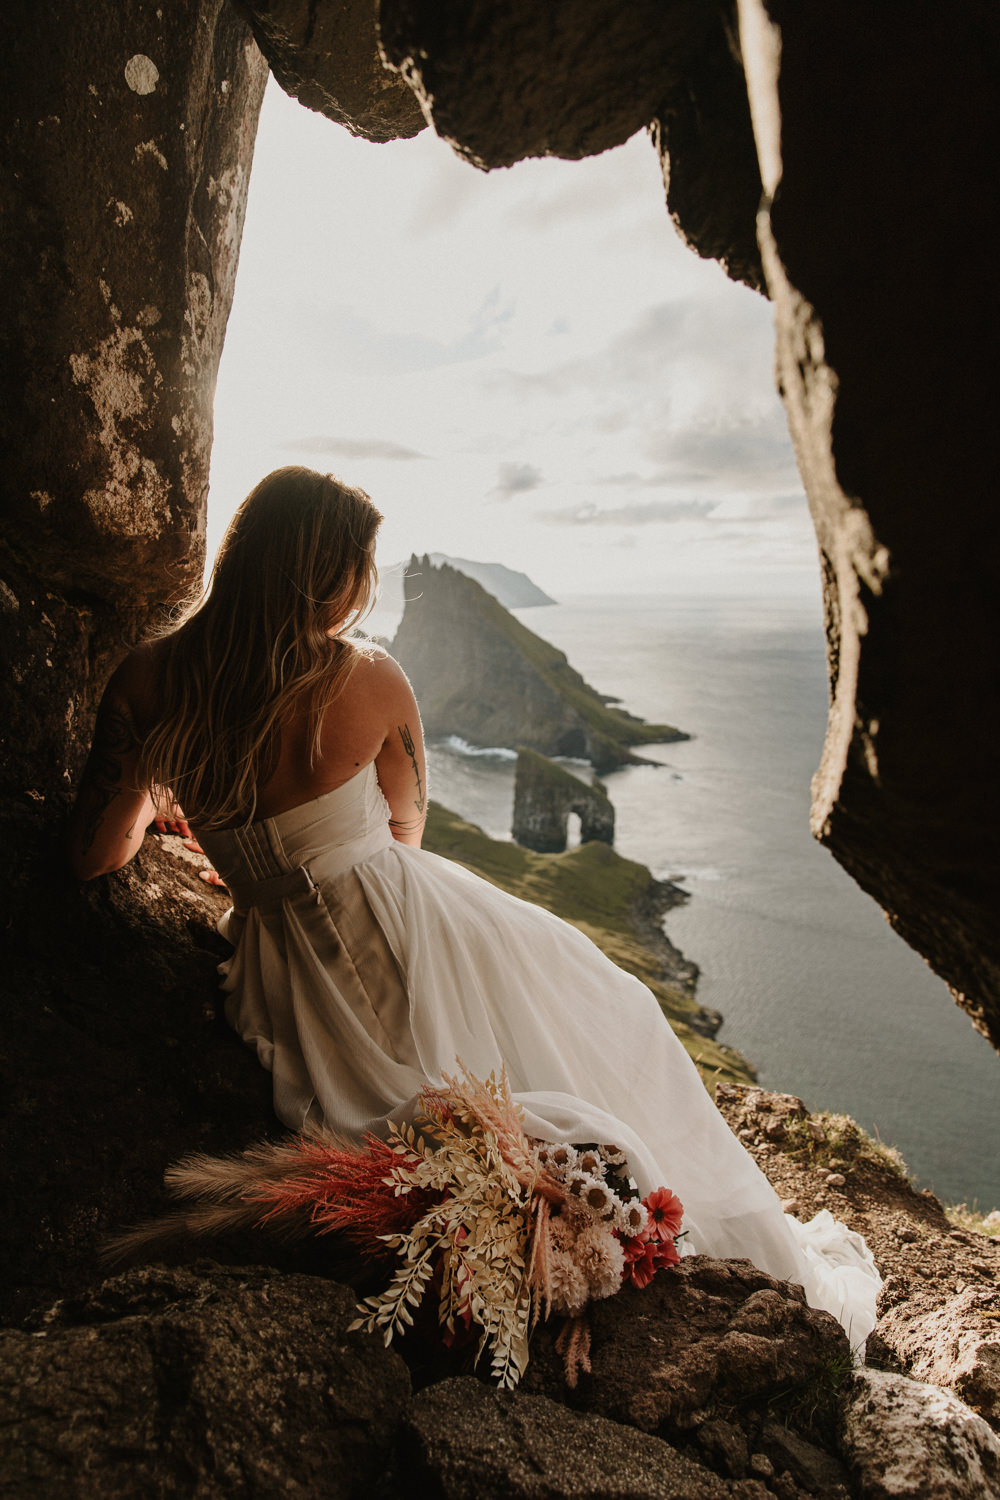 A woman sits on the opening of a small cave overlooking an epic landscape in the Faroe Islands on her elopement day abroad. The ocean and dramatic, jagged islets are in the distance ahead of her.